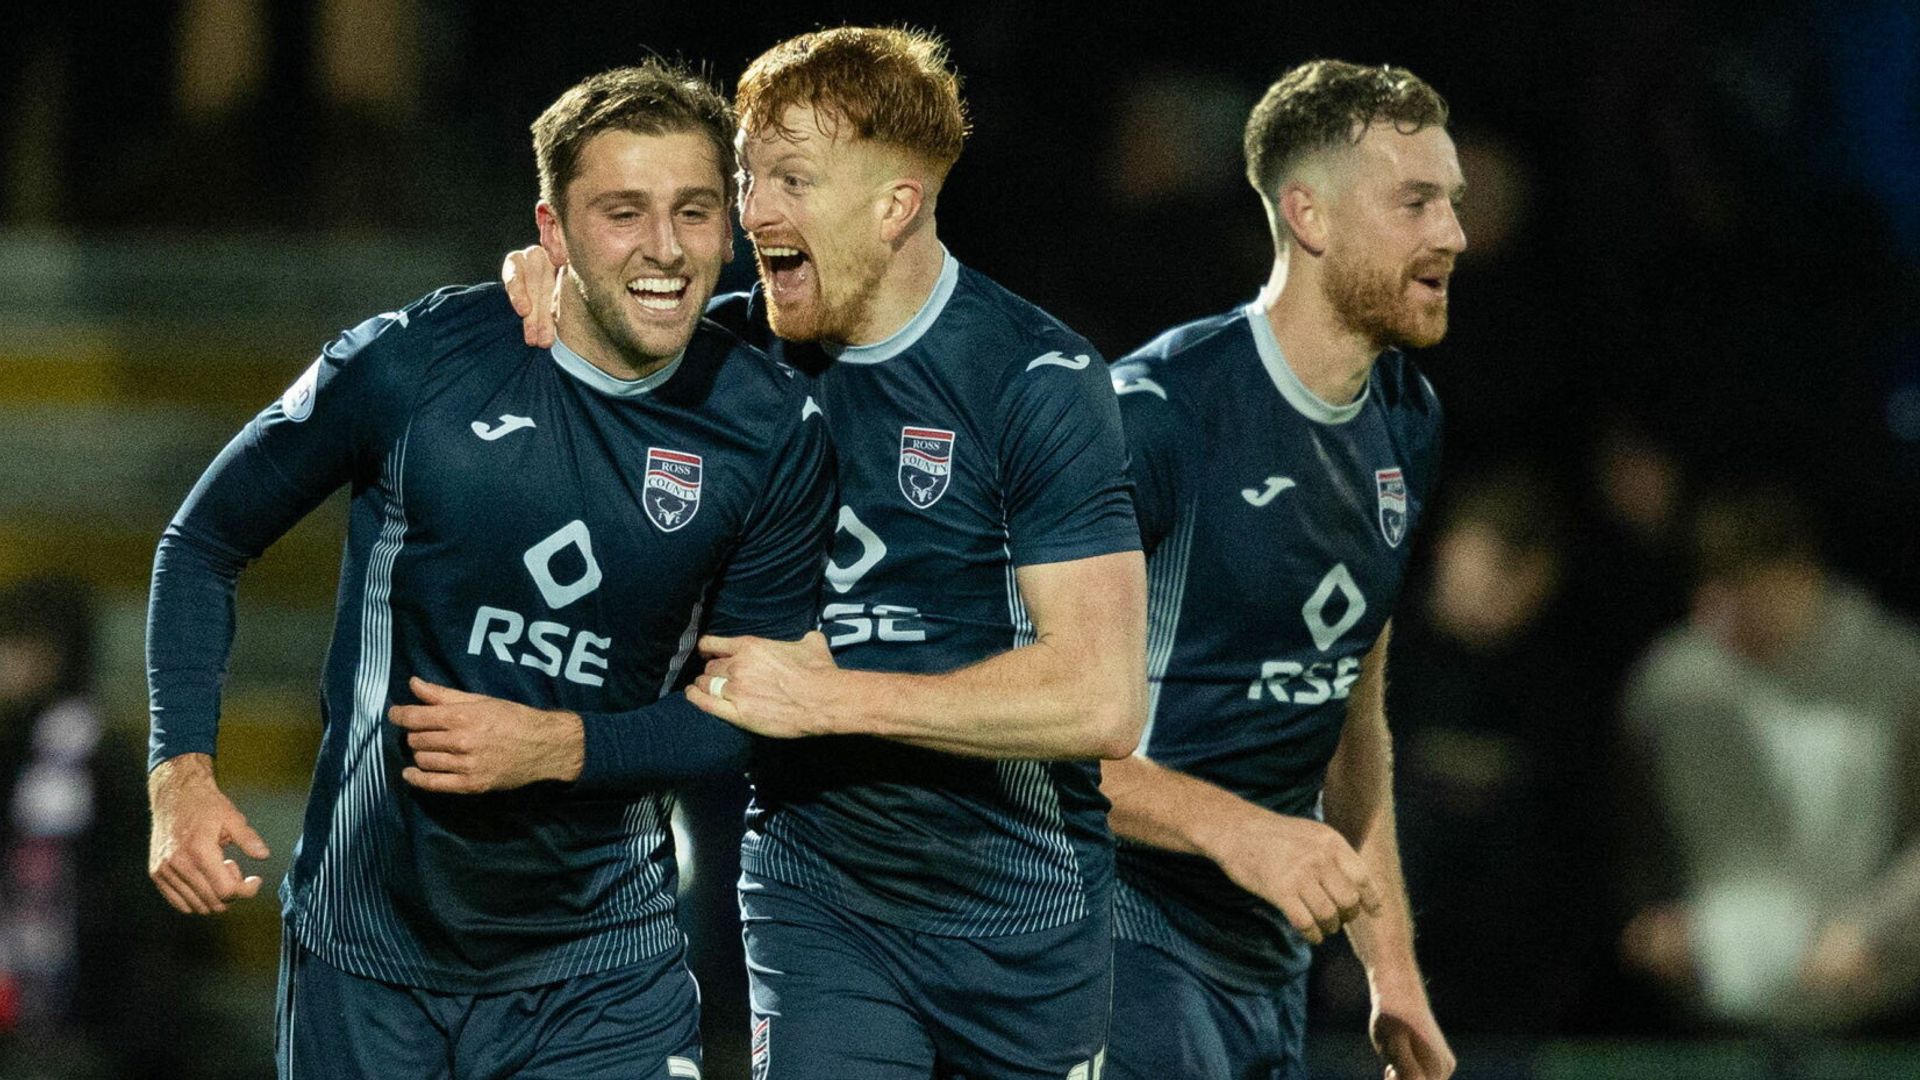 Ross County beat Motherwell to increase pressure on Kettlewell